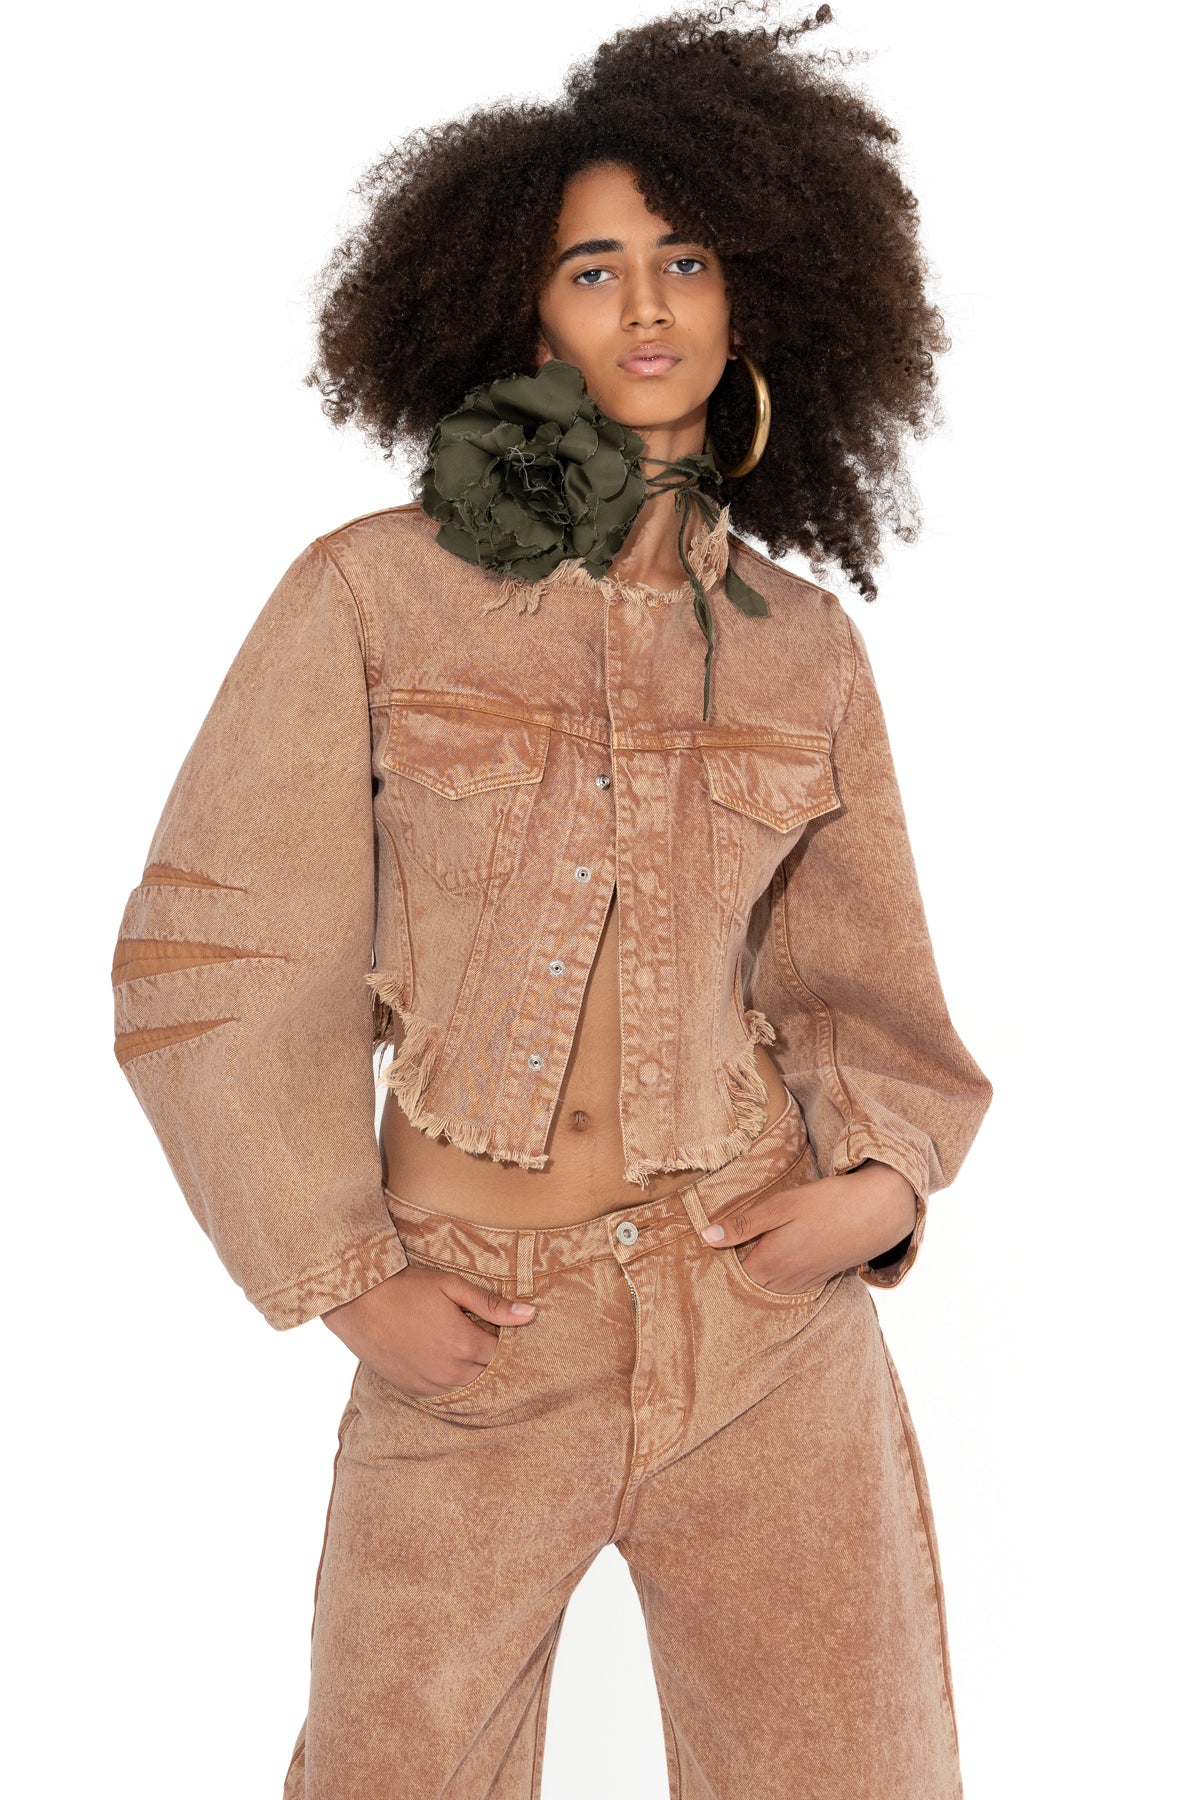 BROWN ROUND SLEEVE CROPPED JACKET marques almeida